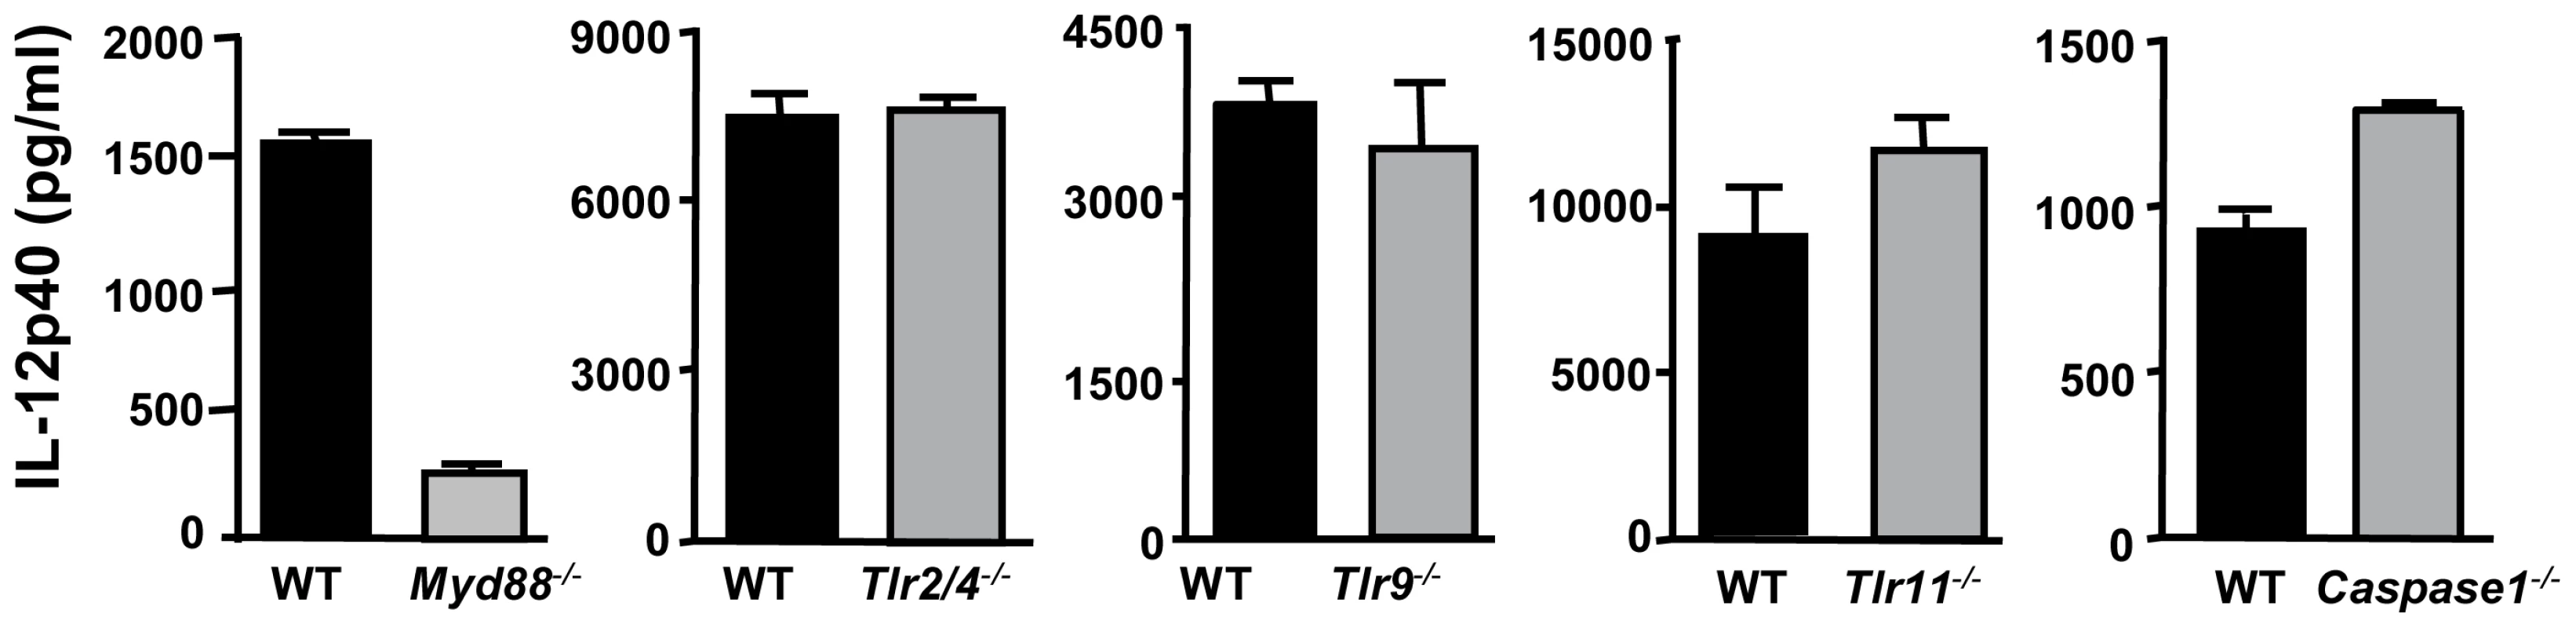 Induction of IL-12 by ΔROP16 tachyzoites requires MyD88, but occurs independently of TLR2, TLR4, TLR9, TLR11, and caspase-1.